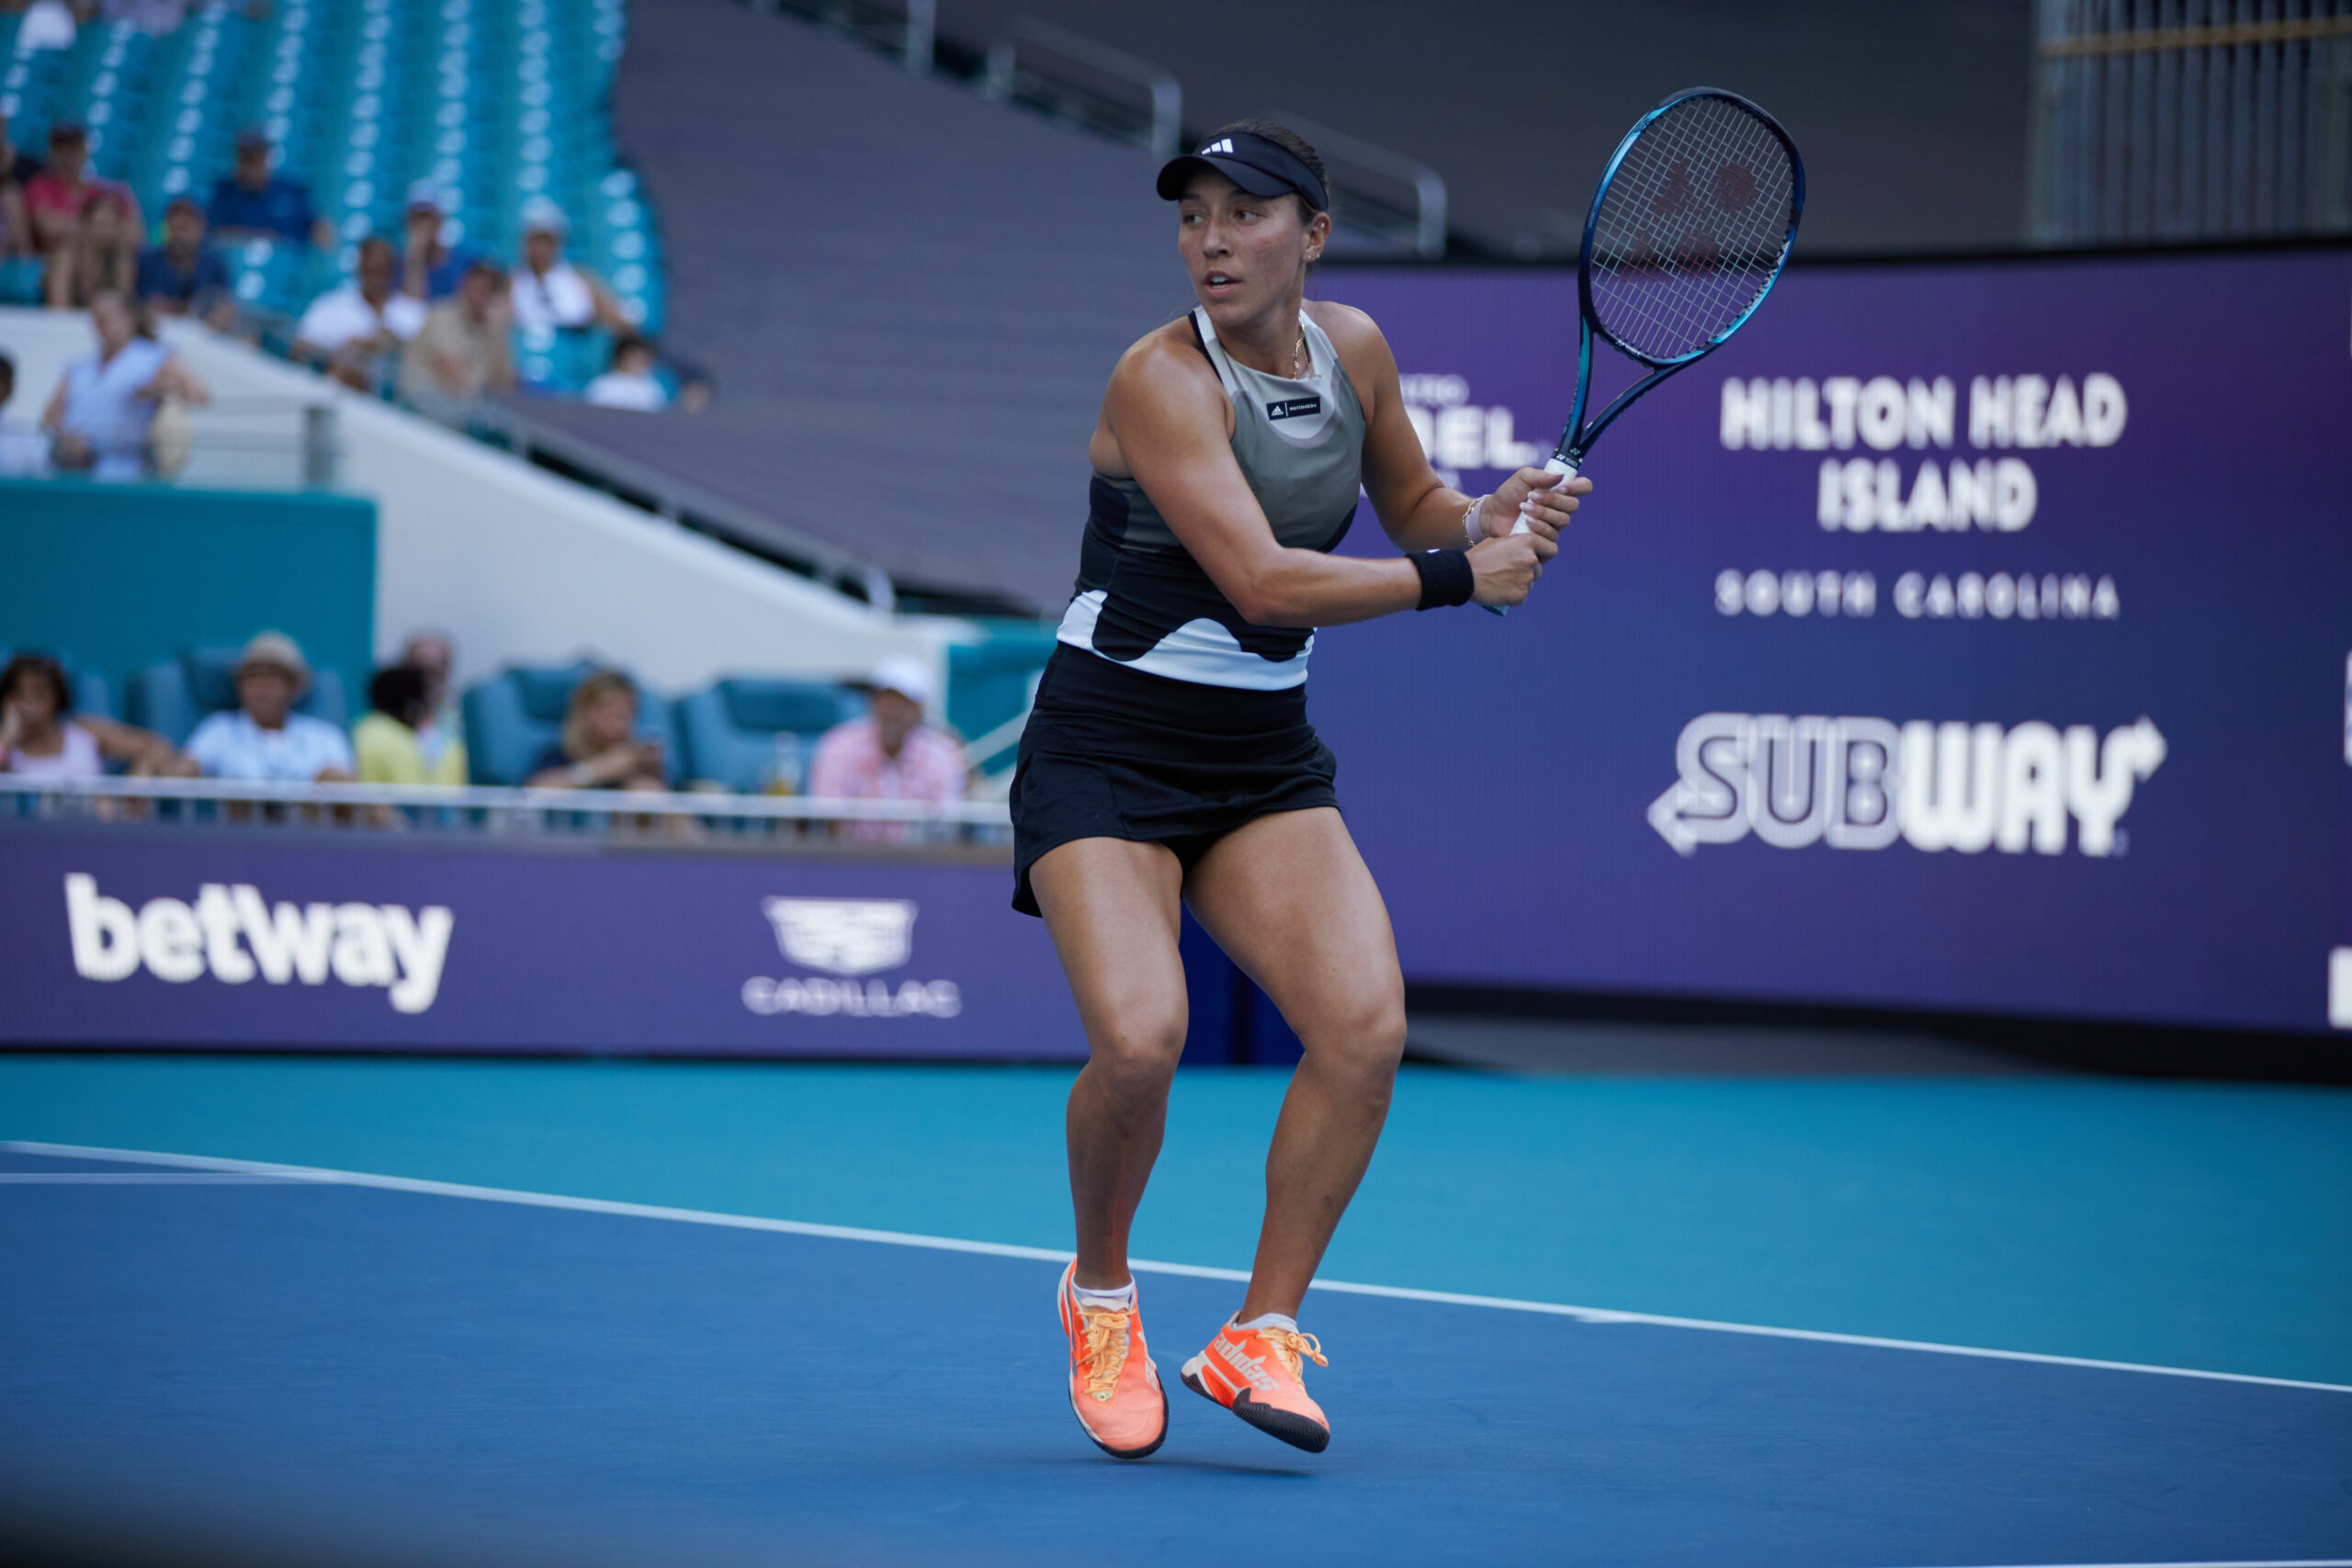 Jessica Pegula lines up for a backhand during her match against Danielle Collins at the 2023 Miami Open